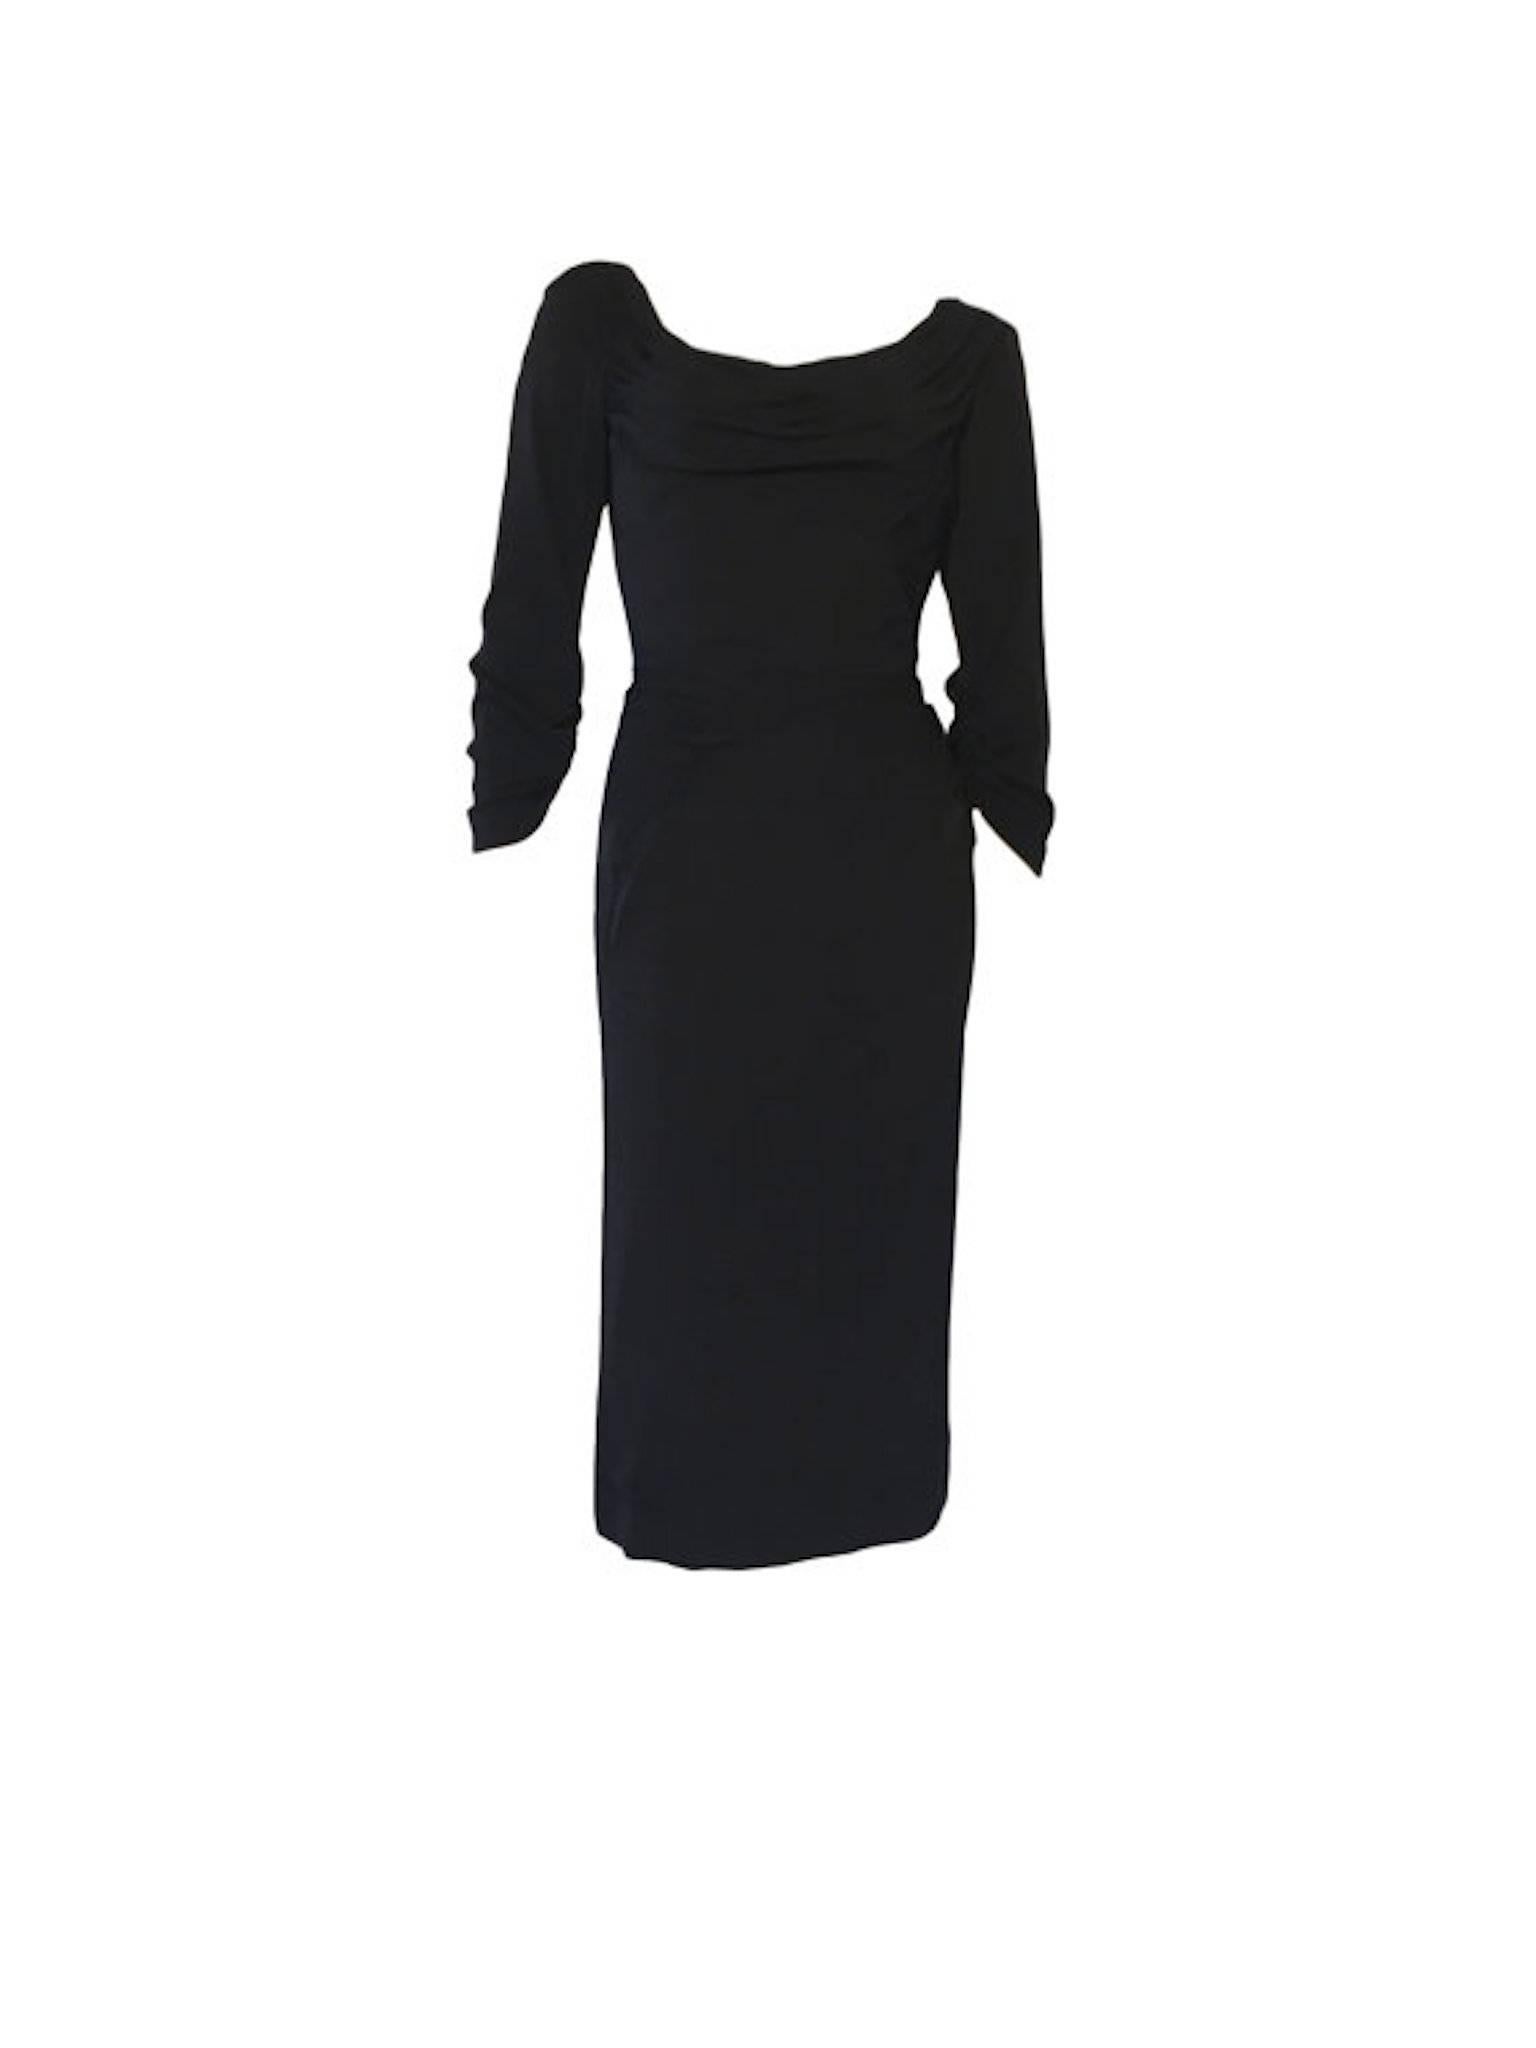 Ceil Chapman vintage 1950s black draped/gathered wiggle dress. In a silk jersey material with metal zip fastening.

Size UK 8 measures 16.5 inches across bust, 12.5 inches across waist and 45 inches length. 
